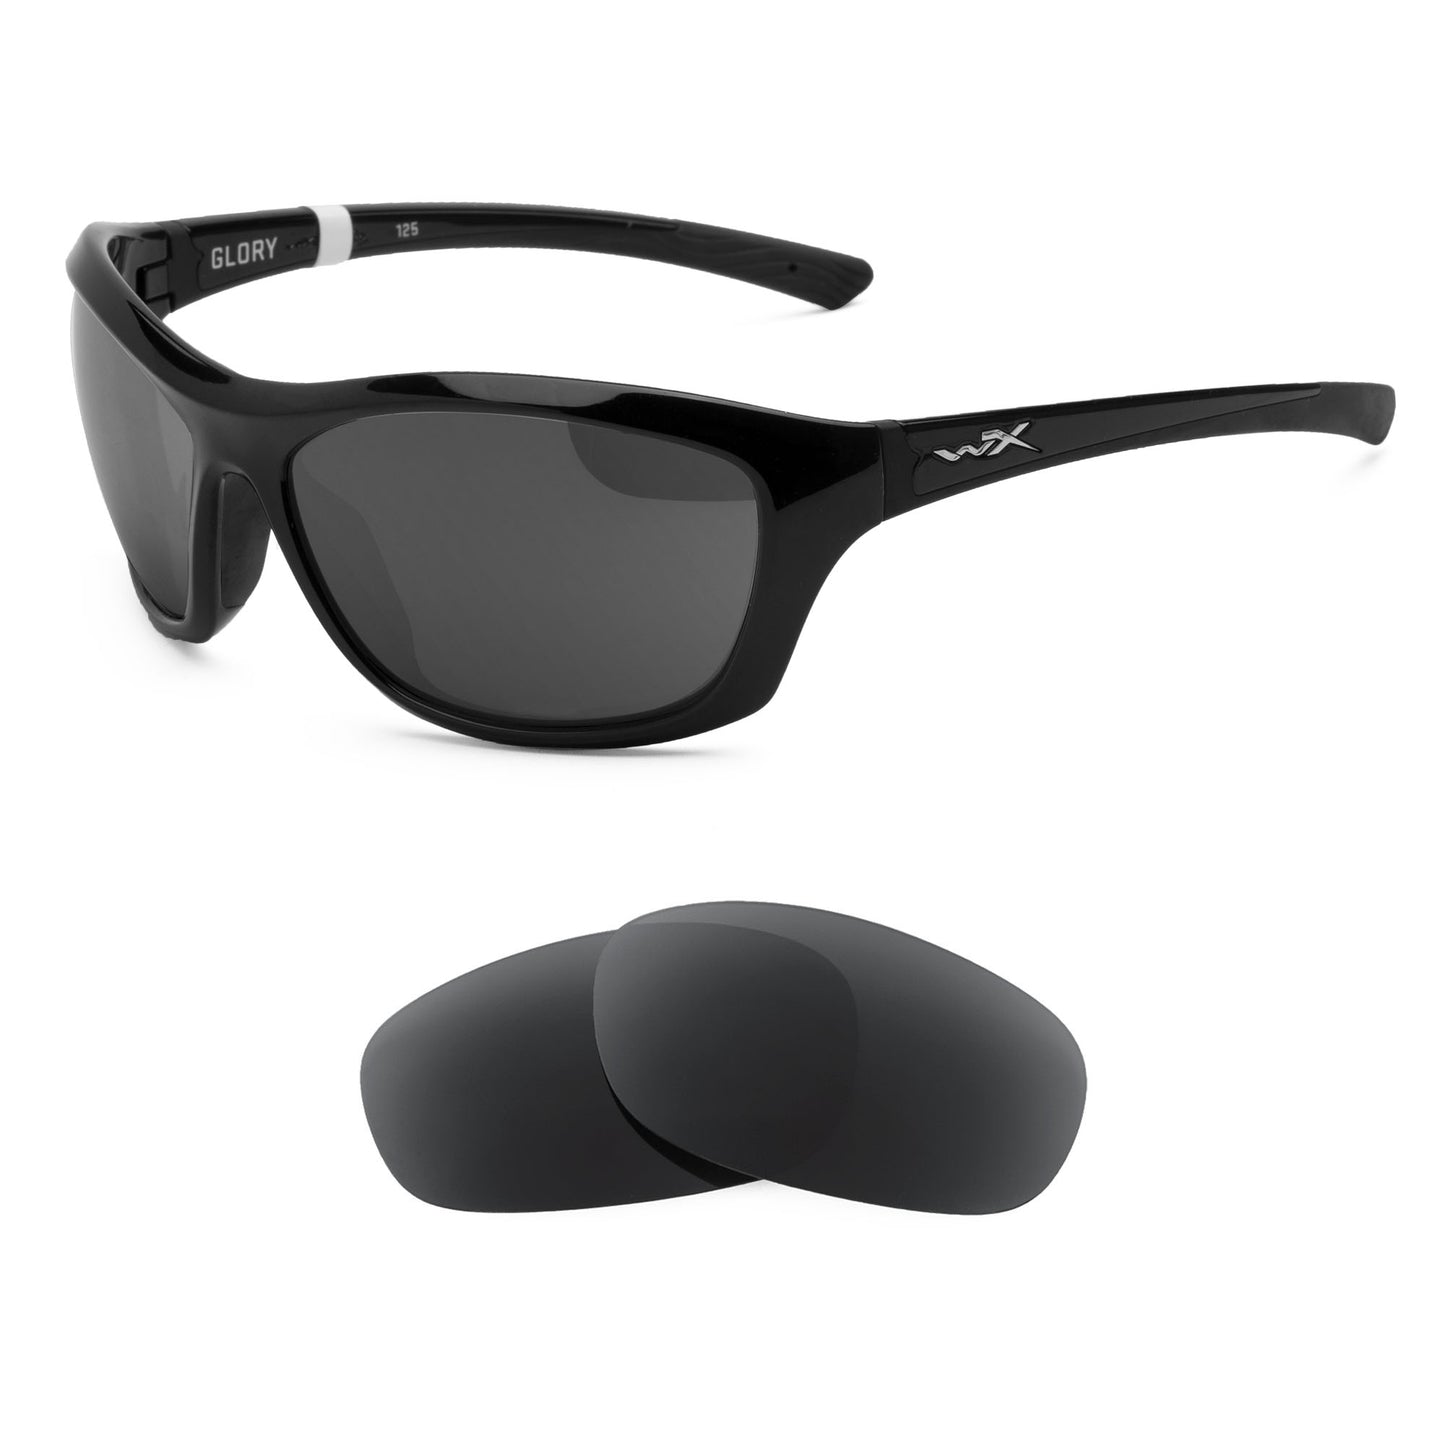 Wiley X Glory sunglasses with replacement lenses